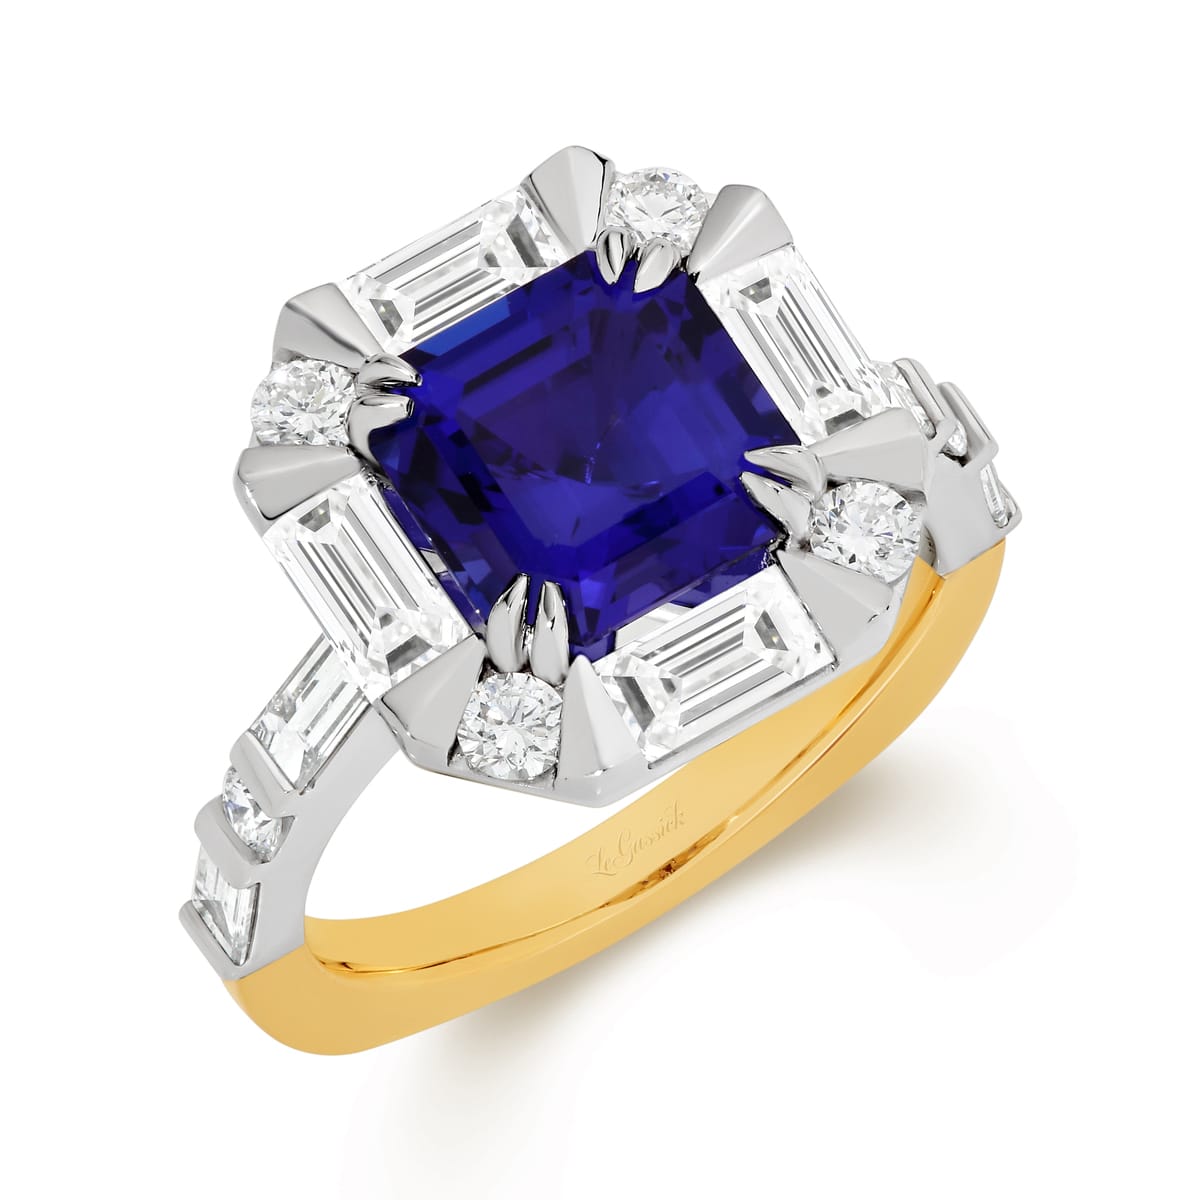 Zarriah features a 3.17ct Asscher cut tanzanite surrounded by a halo of baguette and round brilliant cut diamonds. Her centre stone is set in a double corner claws and her shoulders feature baguettes and round brilliant cut diamonds. Handcrafted to perfection in 18 carat yellow and white gold, she was designed and handcrafted by LeGassick's Master Jewellers, Gold Coast, Australia.